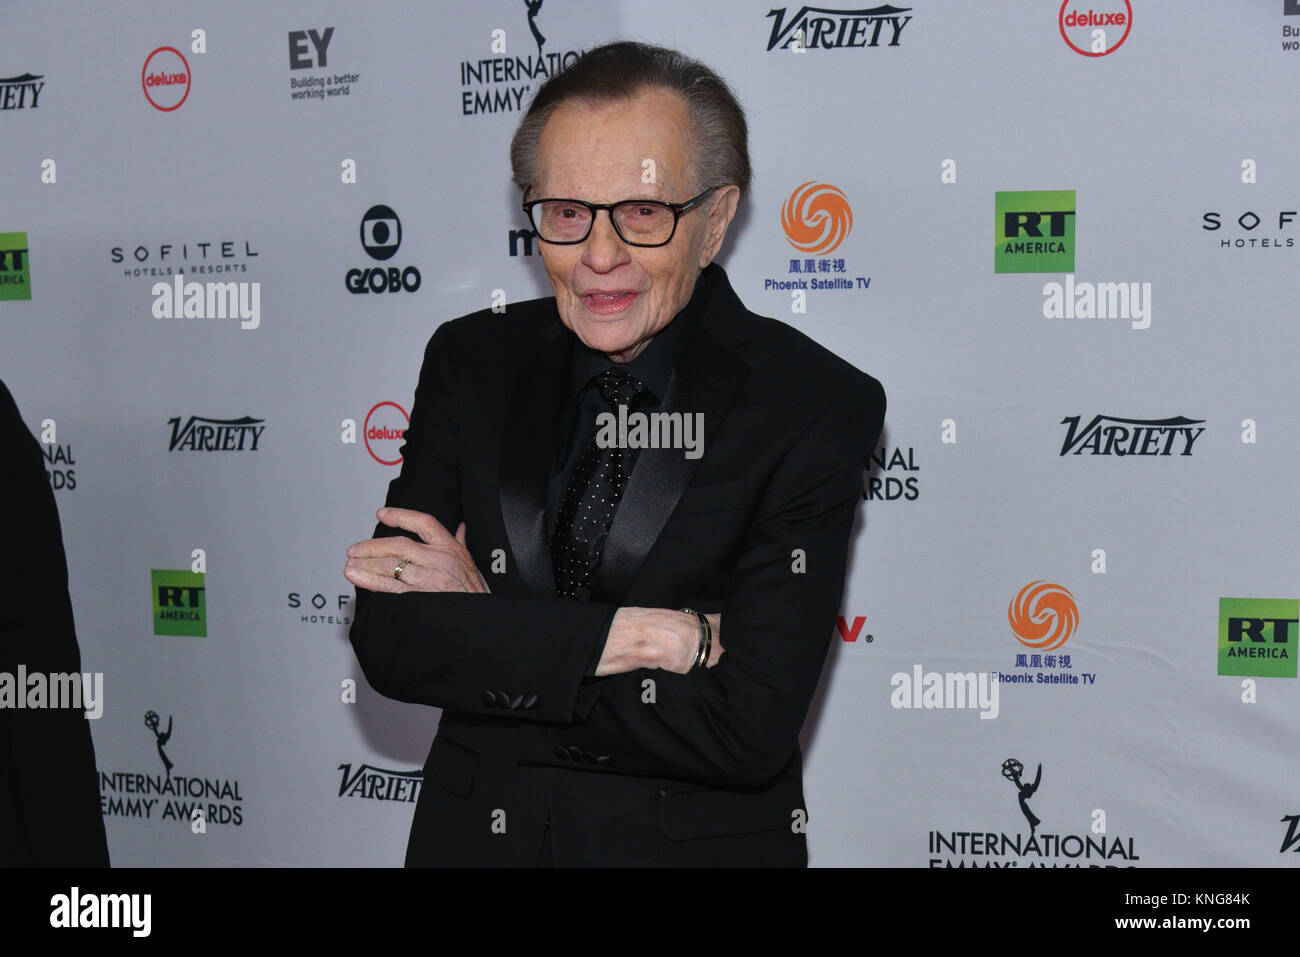 Larry King attends 45th International Emmy Awards at New York Hilton on November 20, 2017 in New York City. Stock Photo